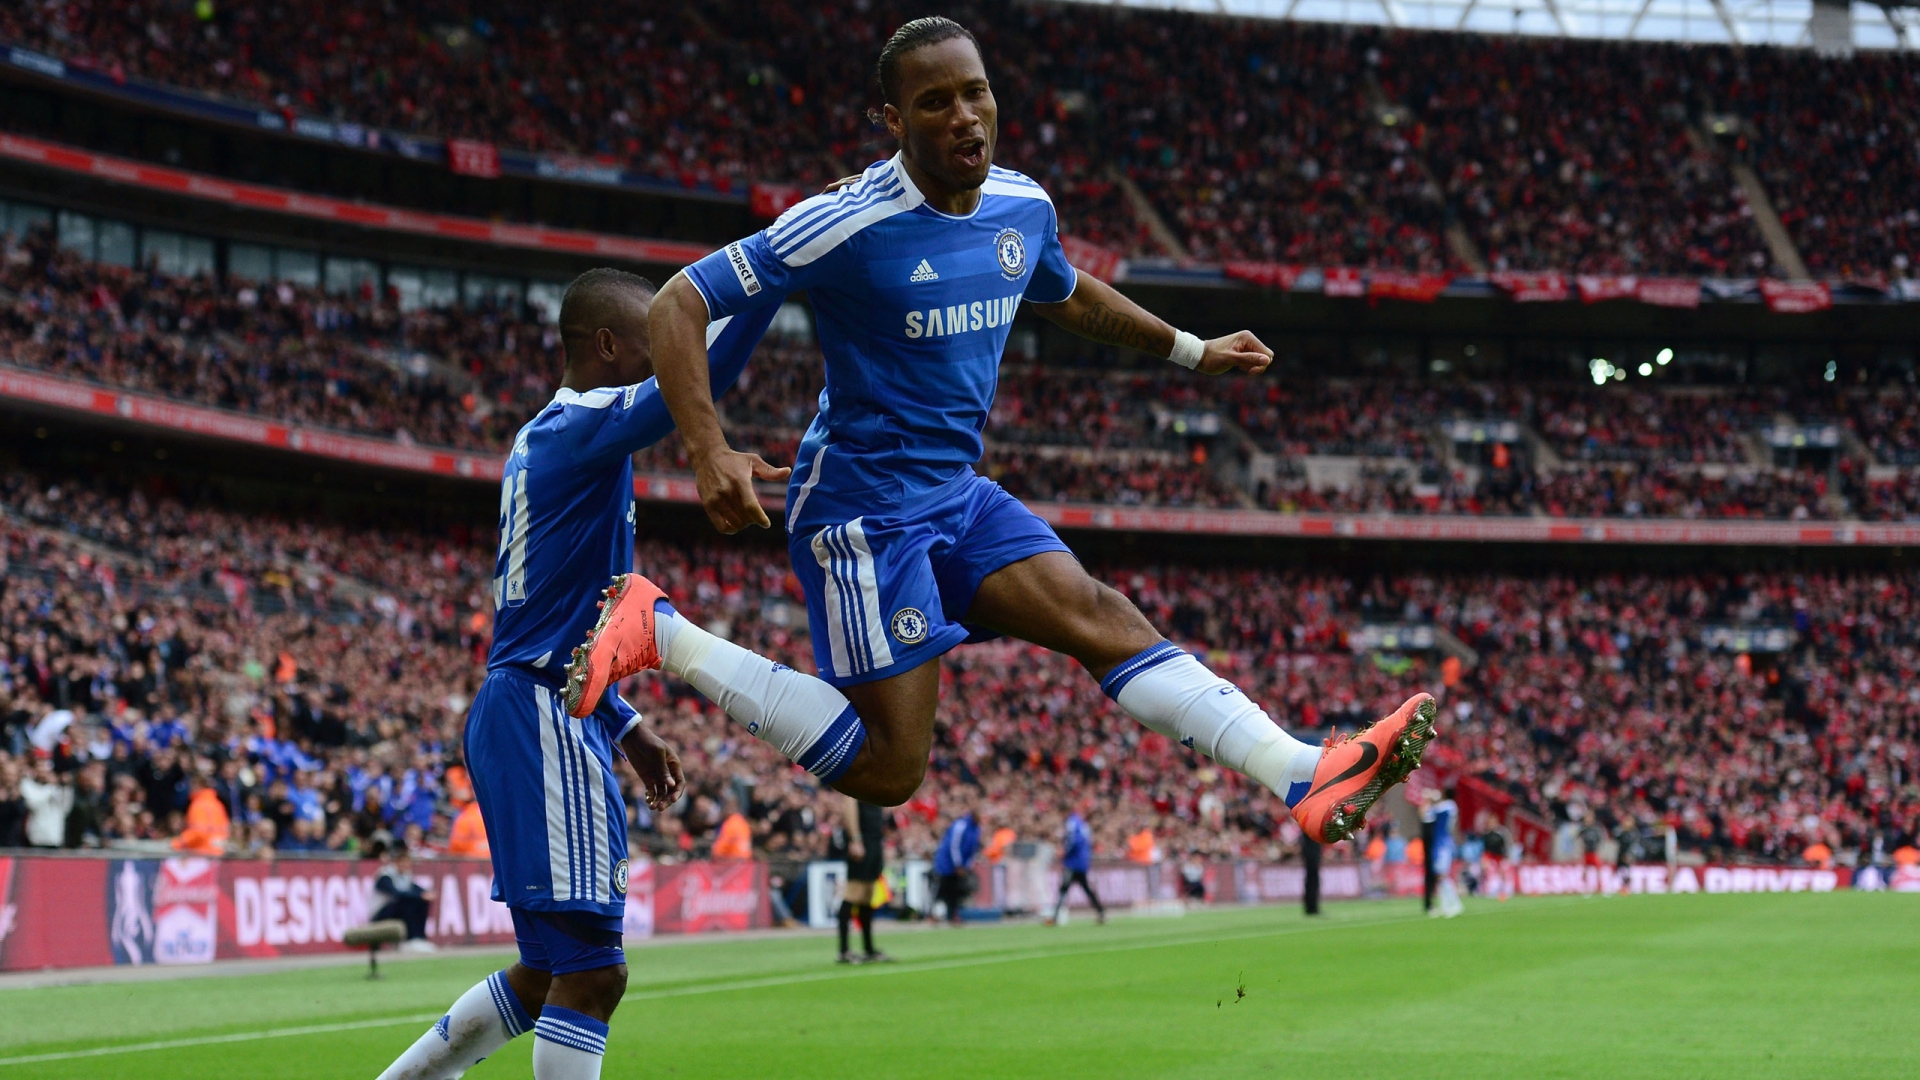 Drogba Jump for 1920 x 1080 HDTV 1080p resolution